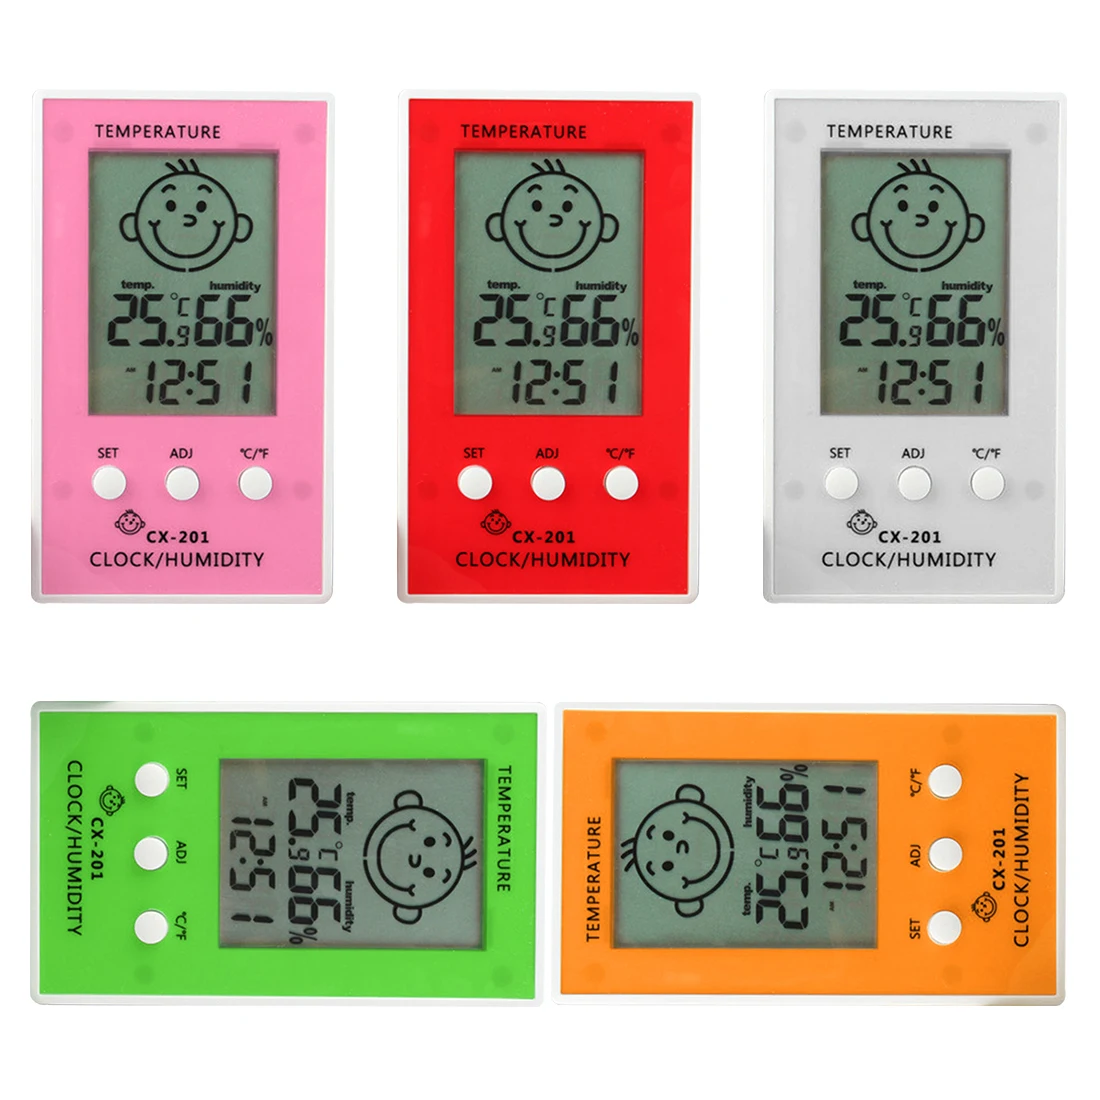 Precise Hygrometer Digital Clock Temperature Logger Humidity Meter Thermometre Hygrometre Indoor Outdoor Thermometer